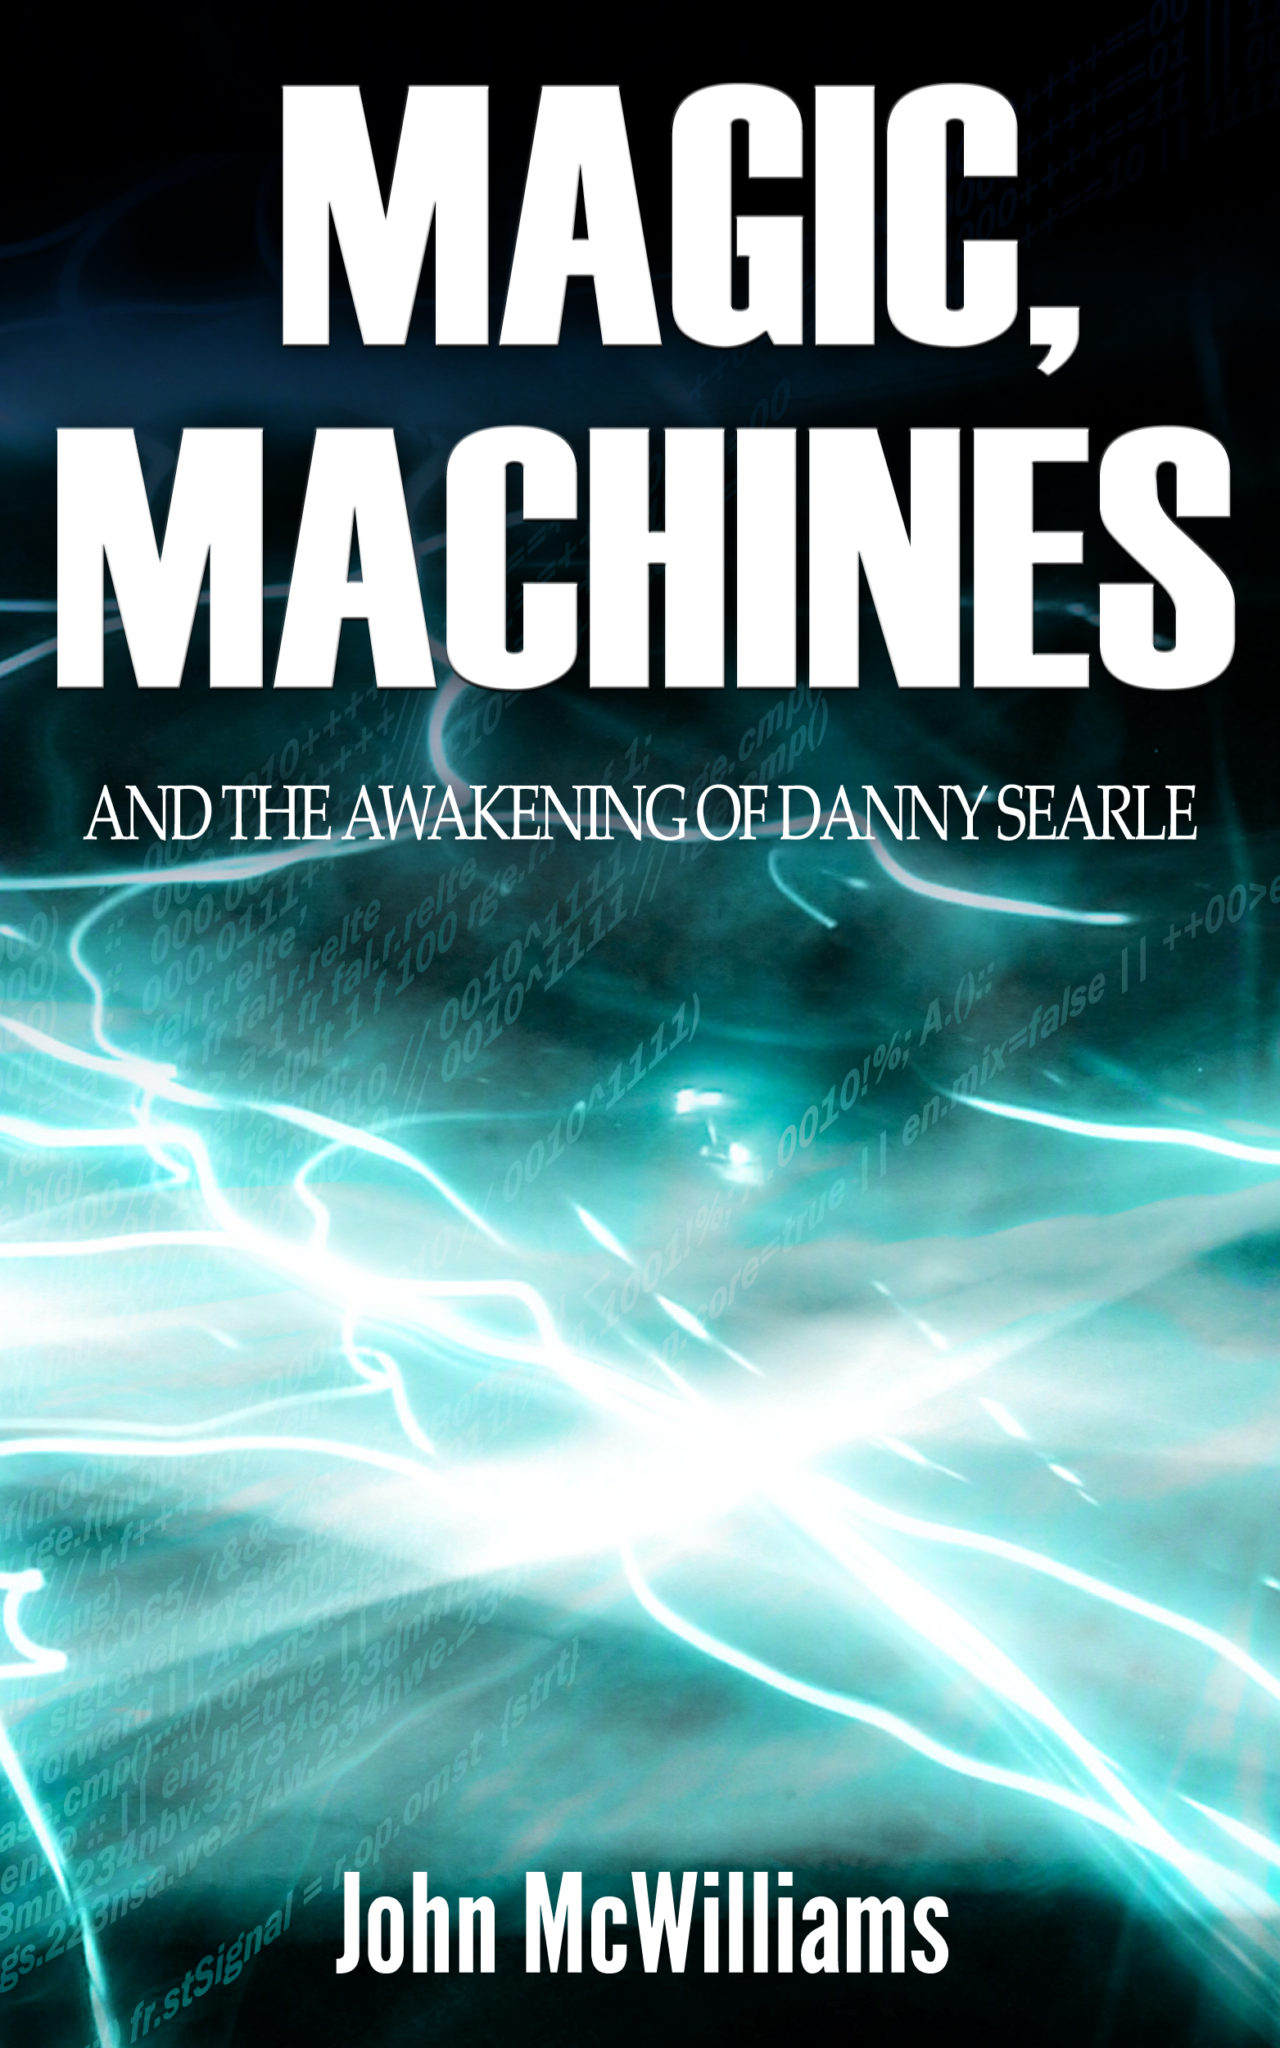 Magic, Machines and the Awakening of Danny Searle by John McWilliams